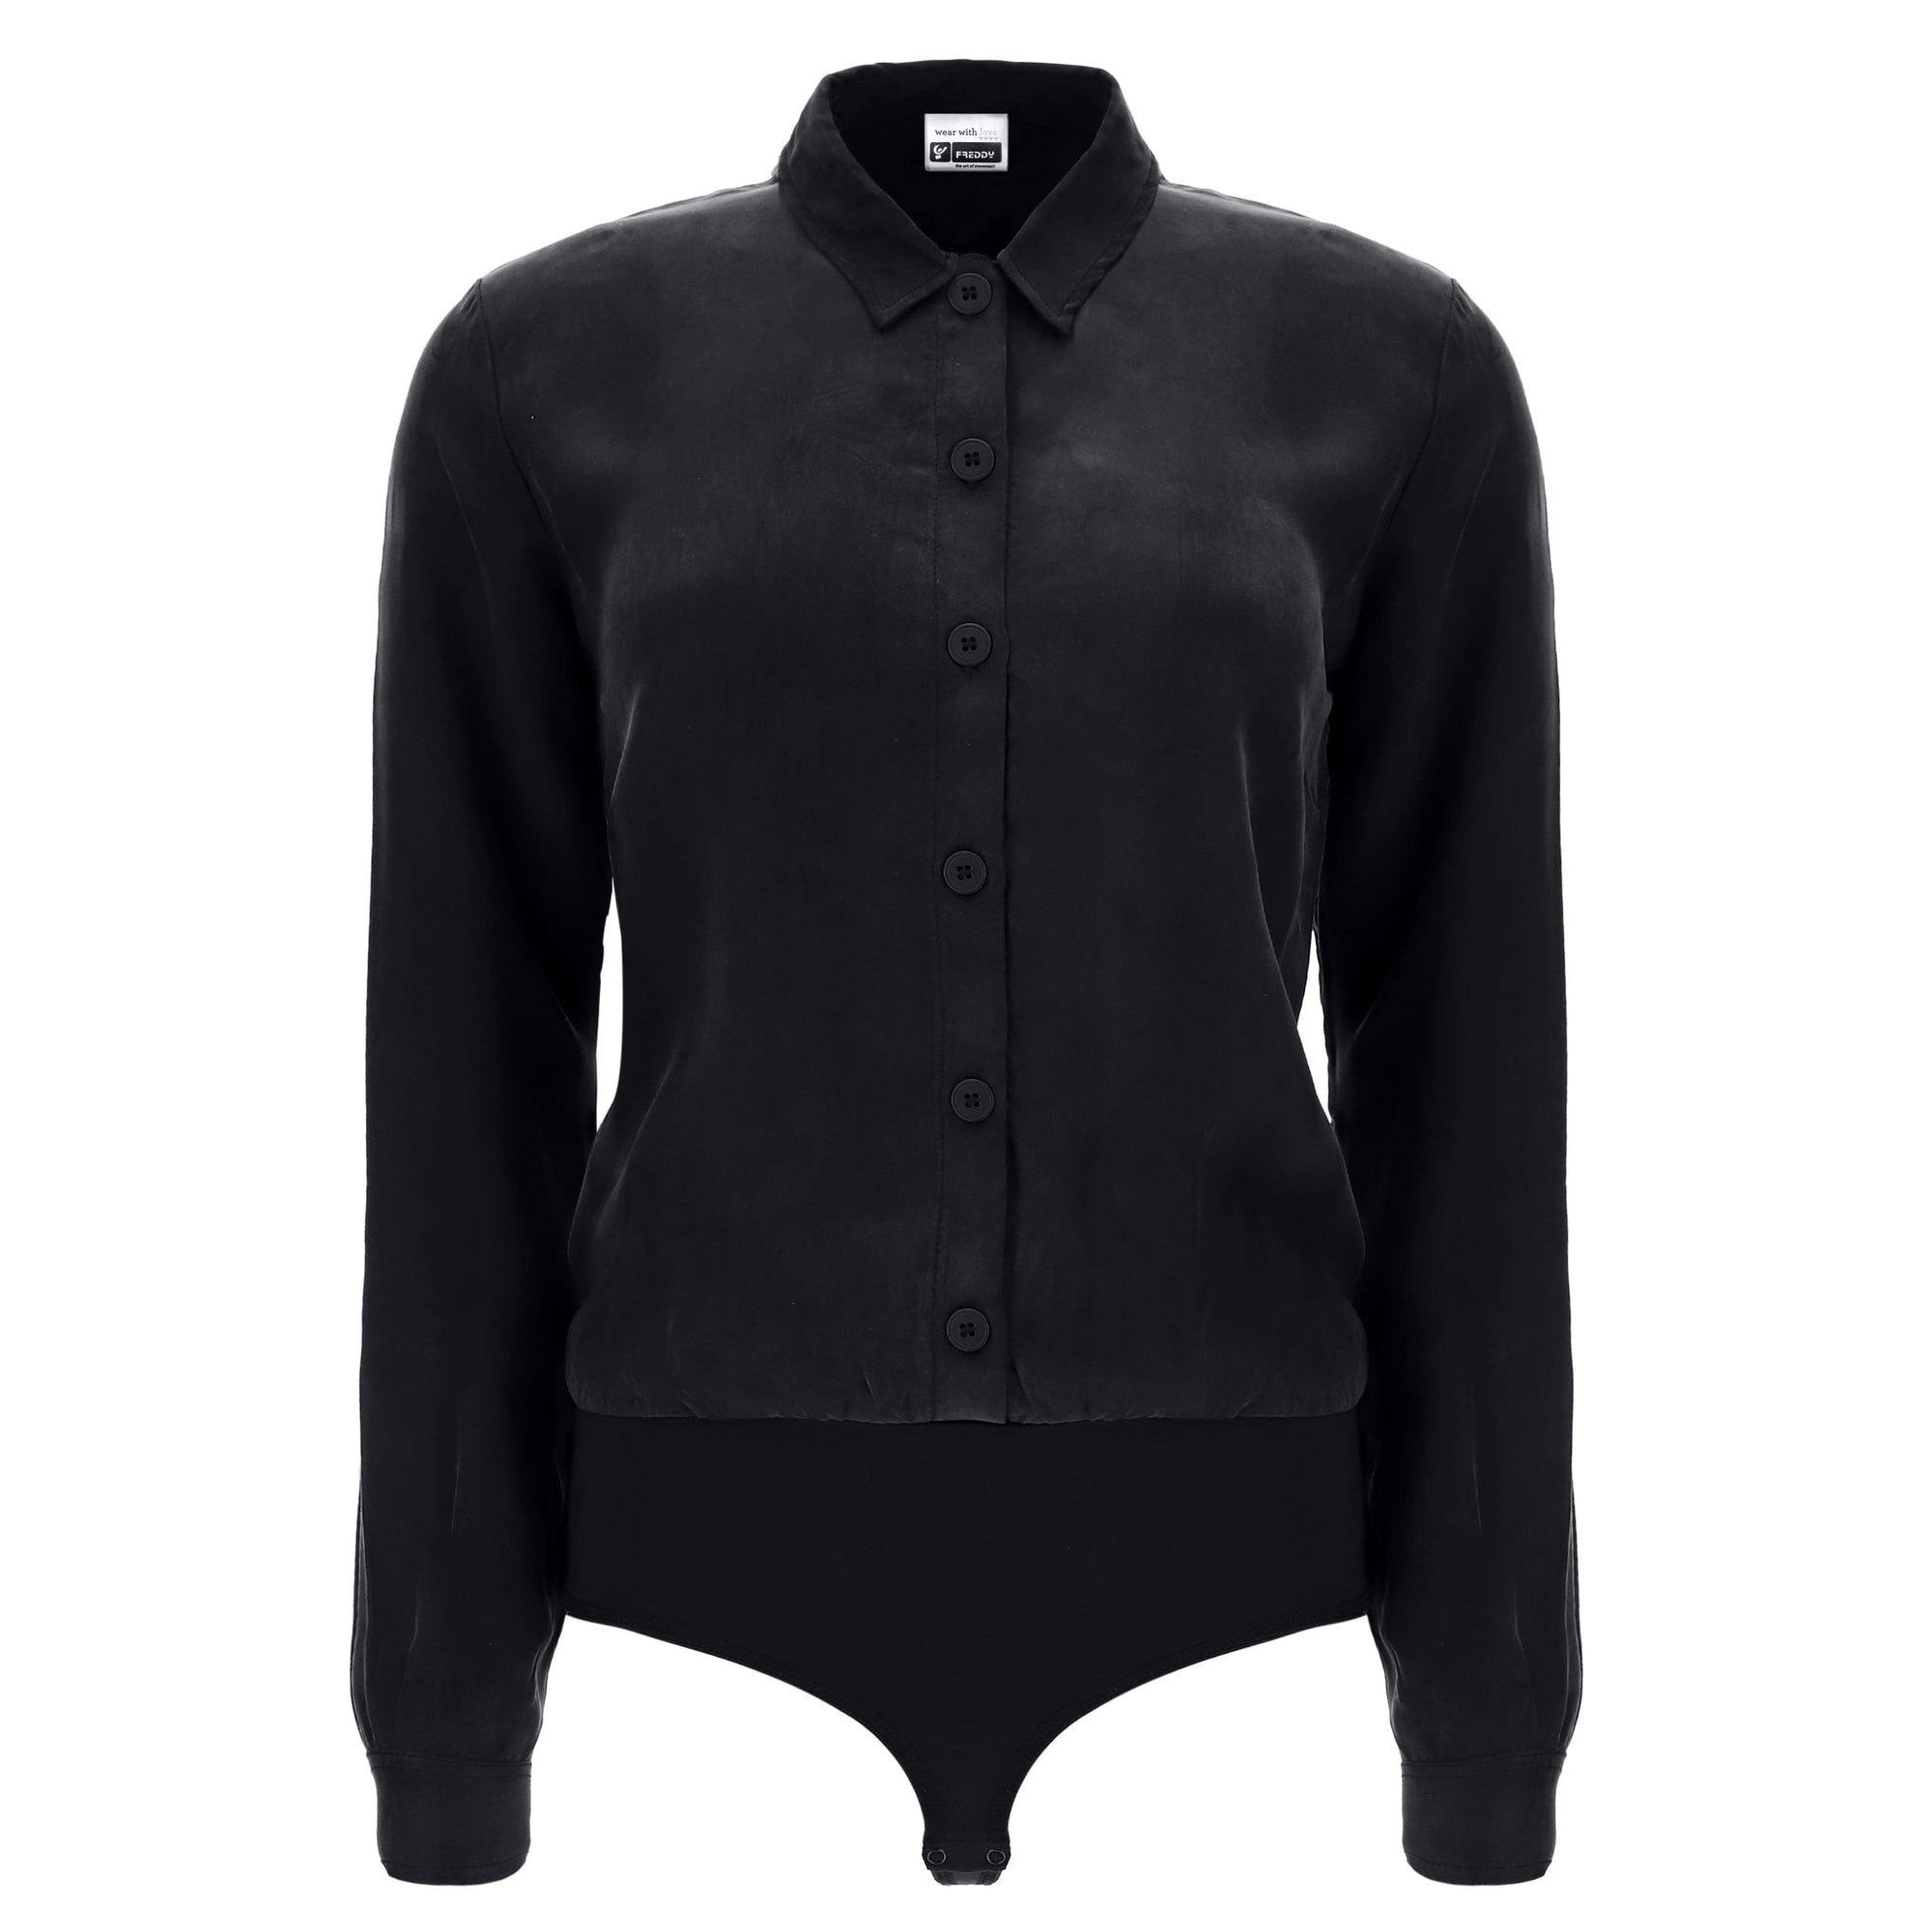 Bodysuit with a Collared Shirt - Black 3